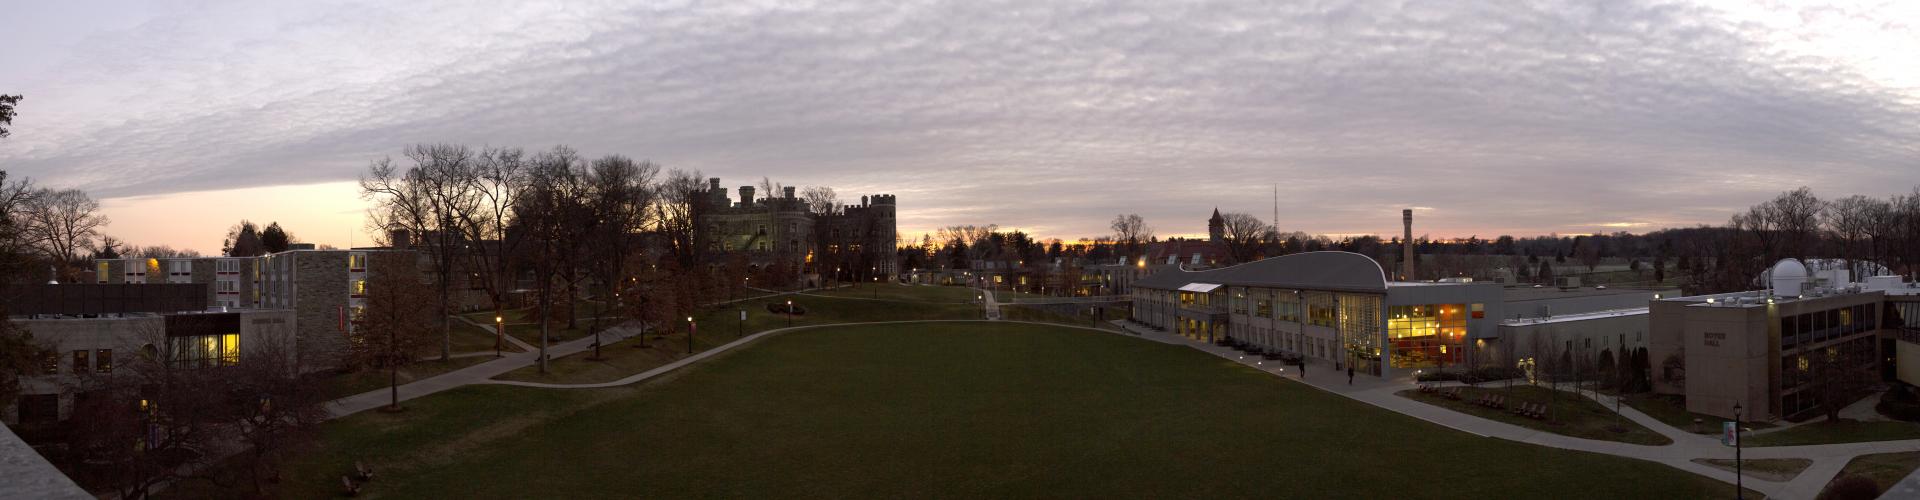 wide shot of campus during the dusk hours